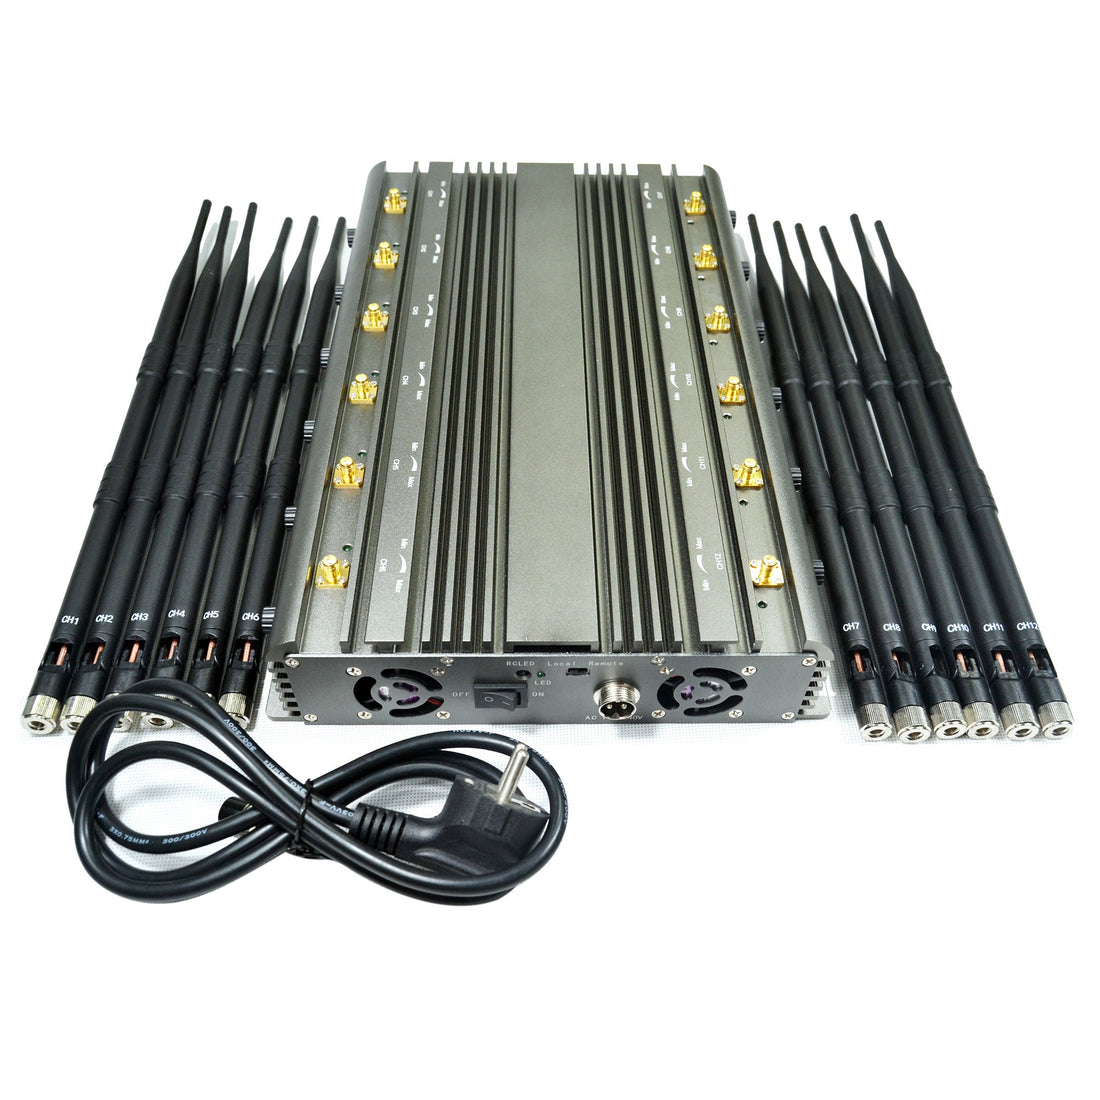 How to distinguish the advantages and disadvantages of cell phone signal jammers?